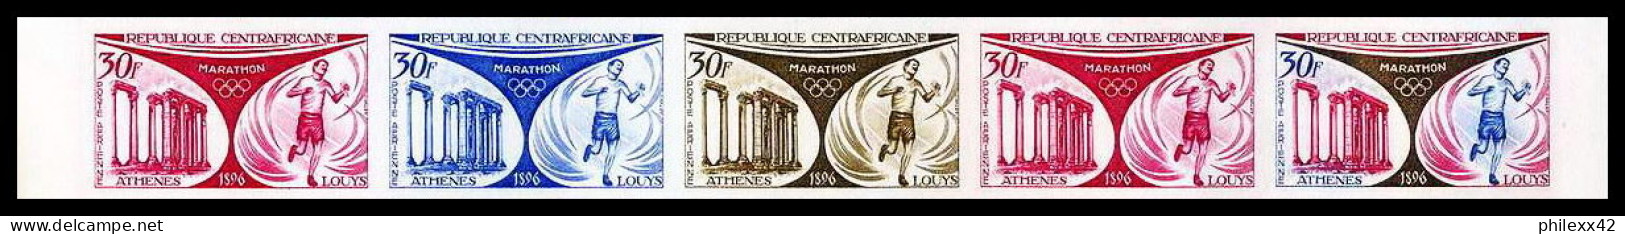 92920e Centrafricaine PA 110 Marathon Athenes 1896 Jeux Olympiques Olympic Games Essai Proof Non Dentelé Imperf Bande 5 - Sommer 1896: Athen